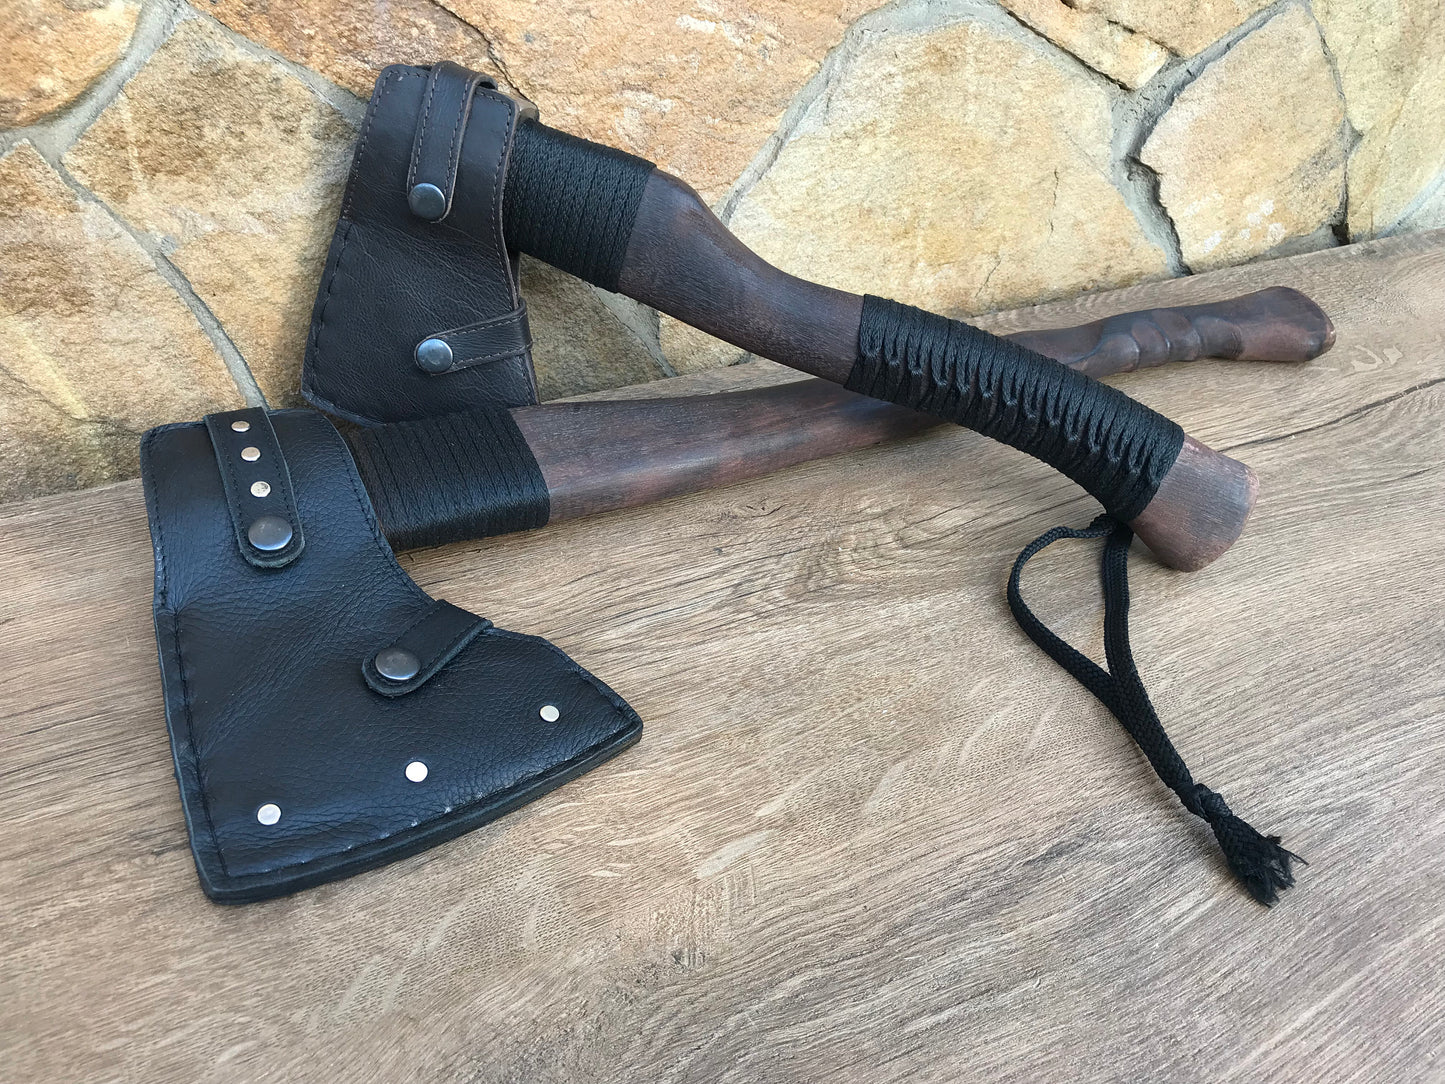 Viking axe, leather sheath, his birthday gift,mens anniversary gift, gift for dad, gift for men, Christmas gift, Fathers day gift, bear, axe